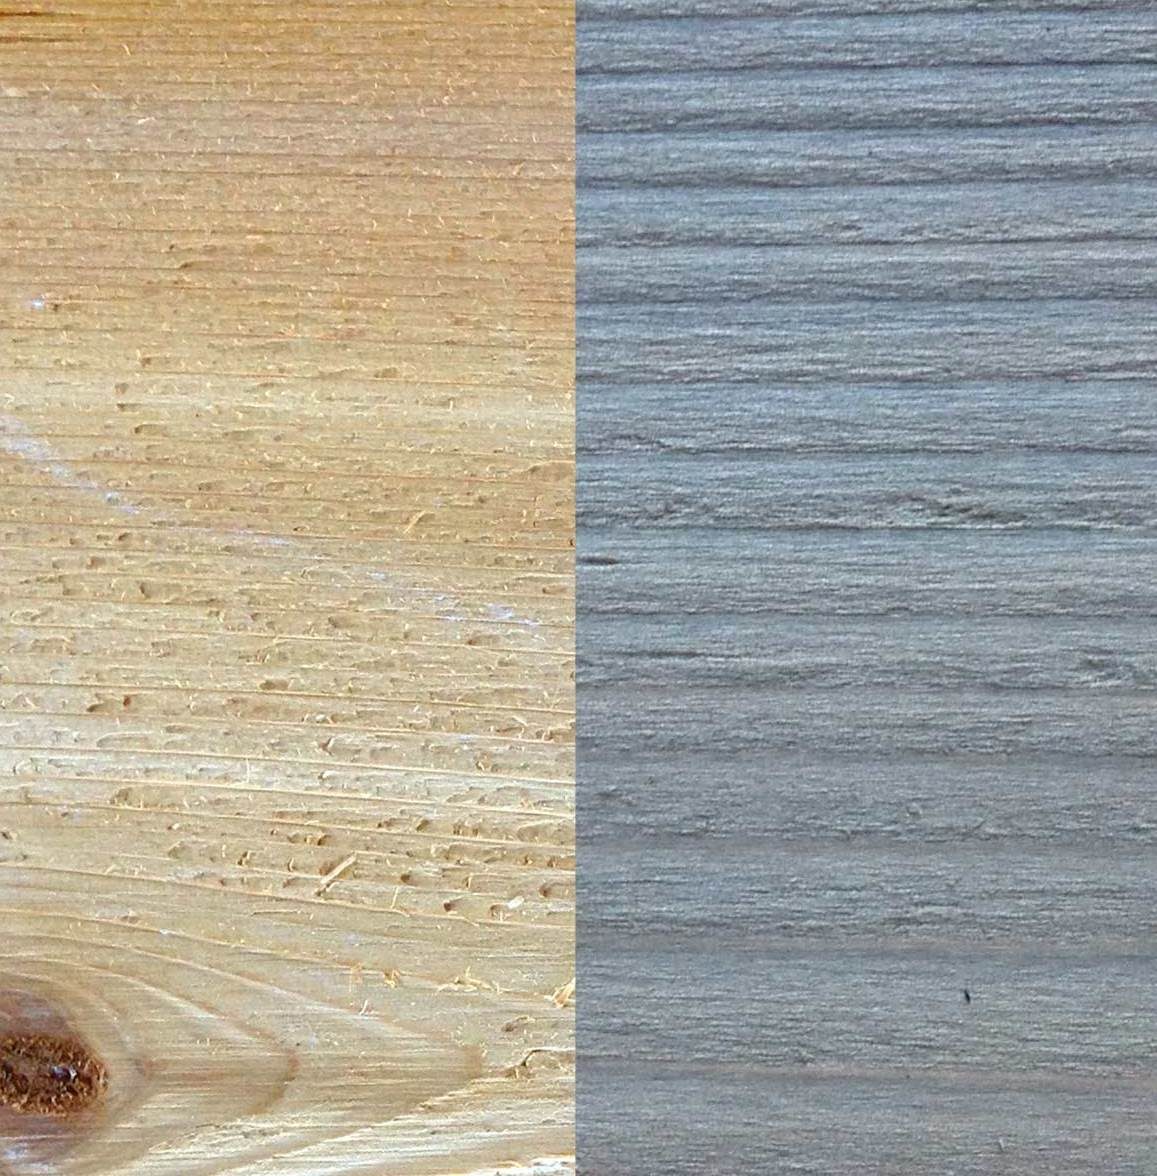 Before and after: cedar and iron vinegar